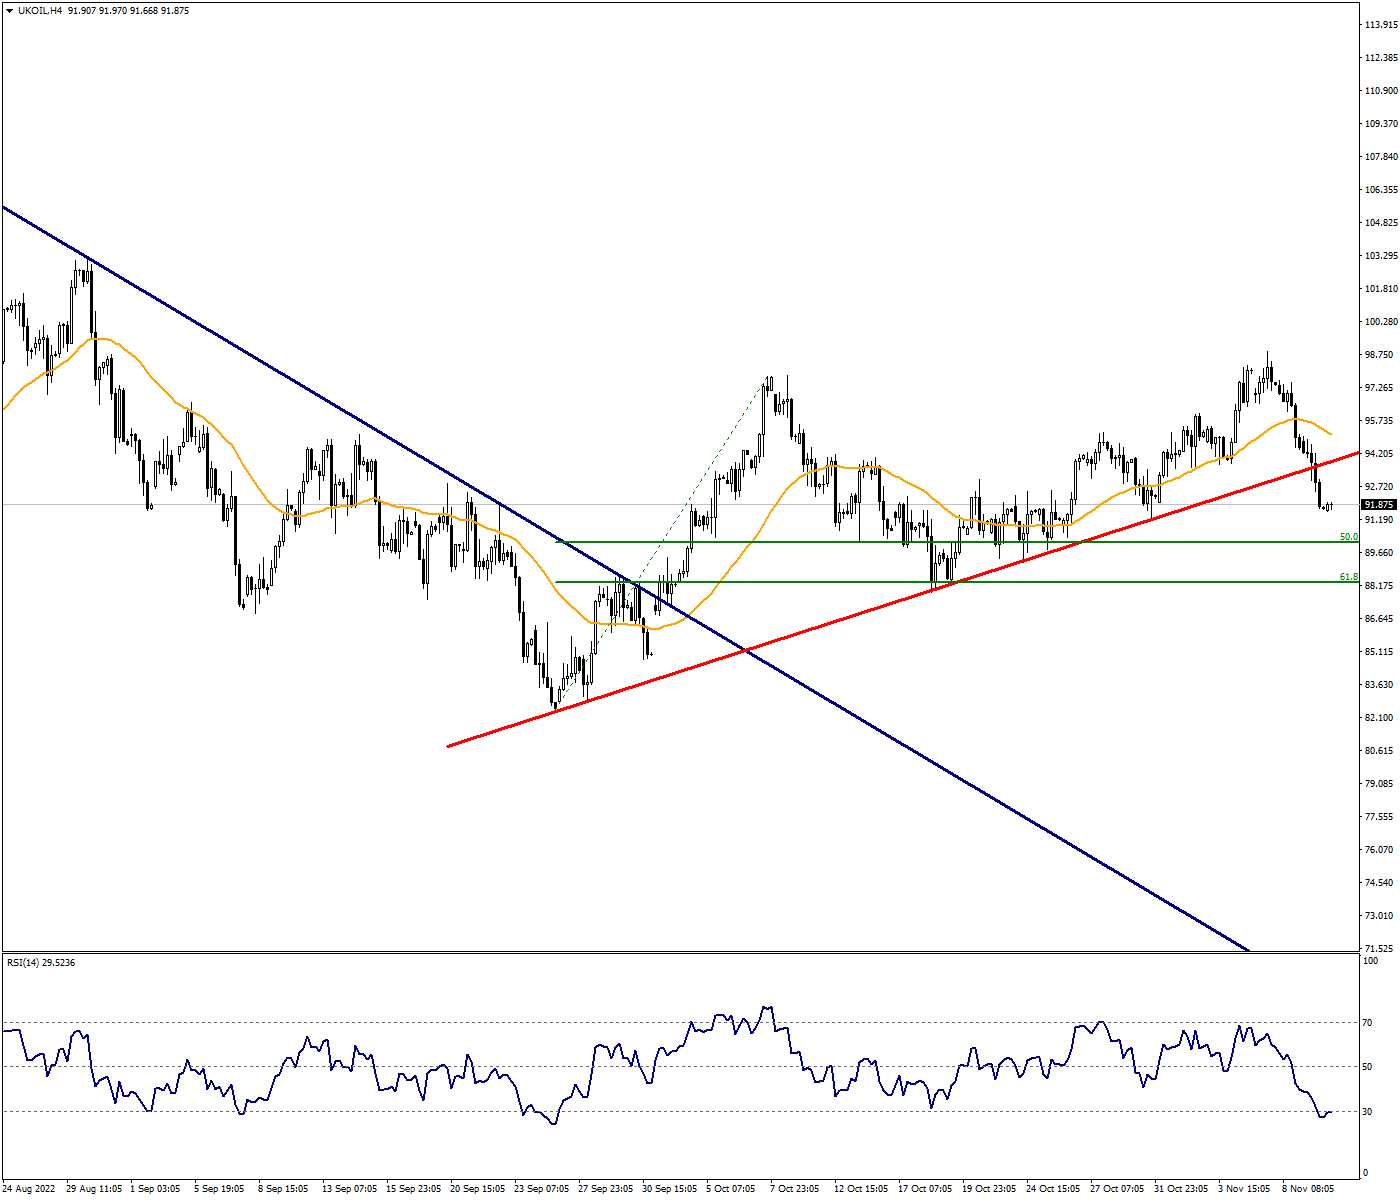 Brent Oil Ends its Uptrend